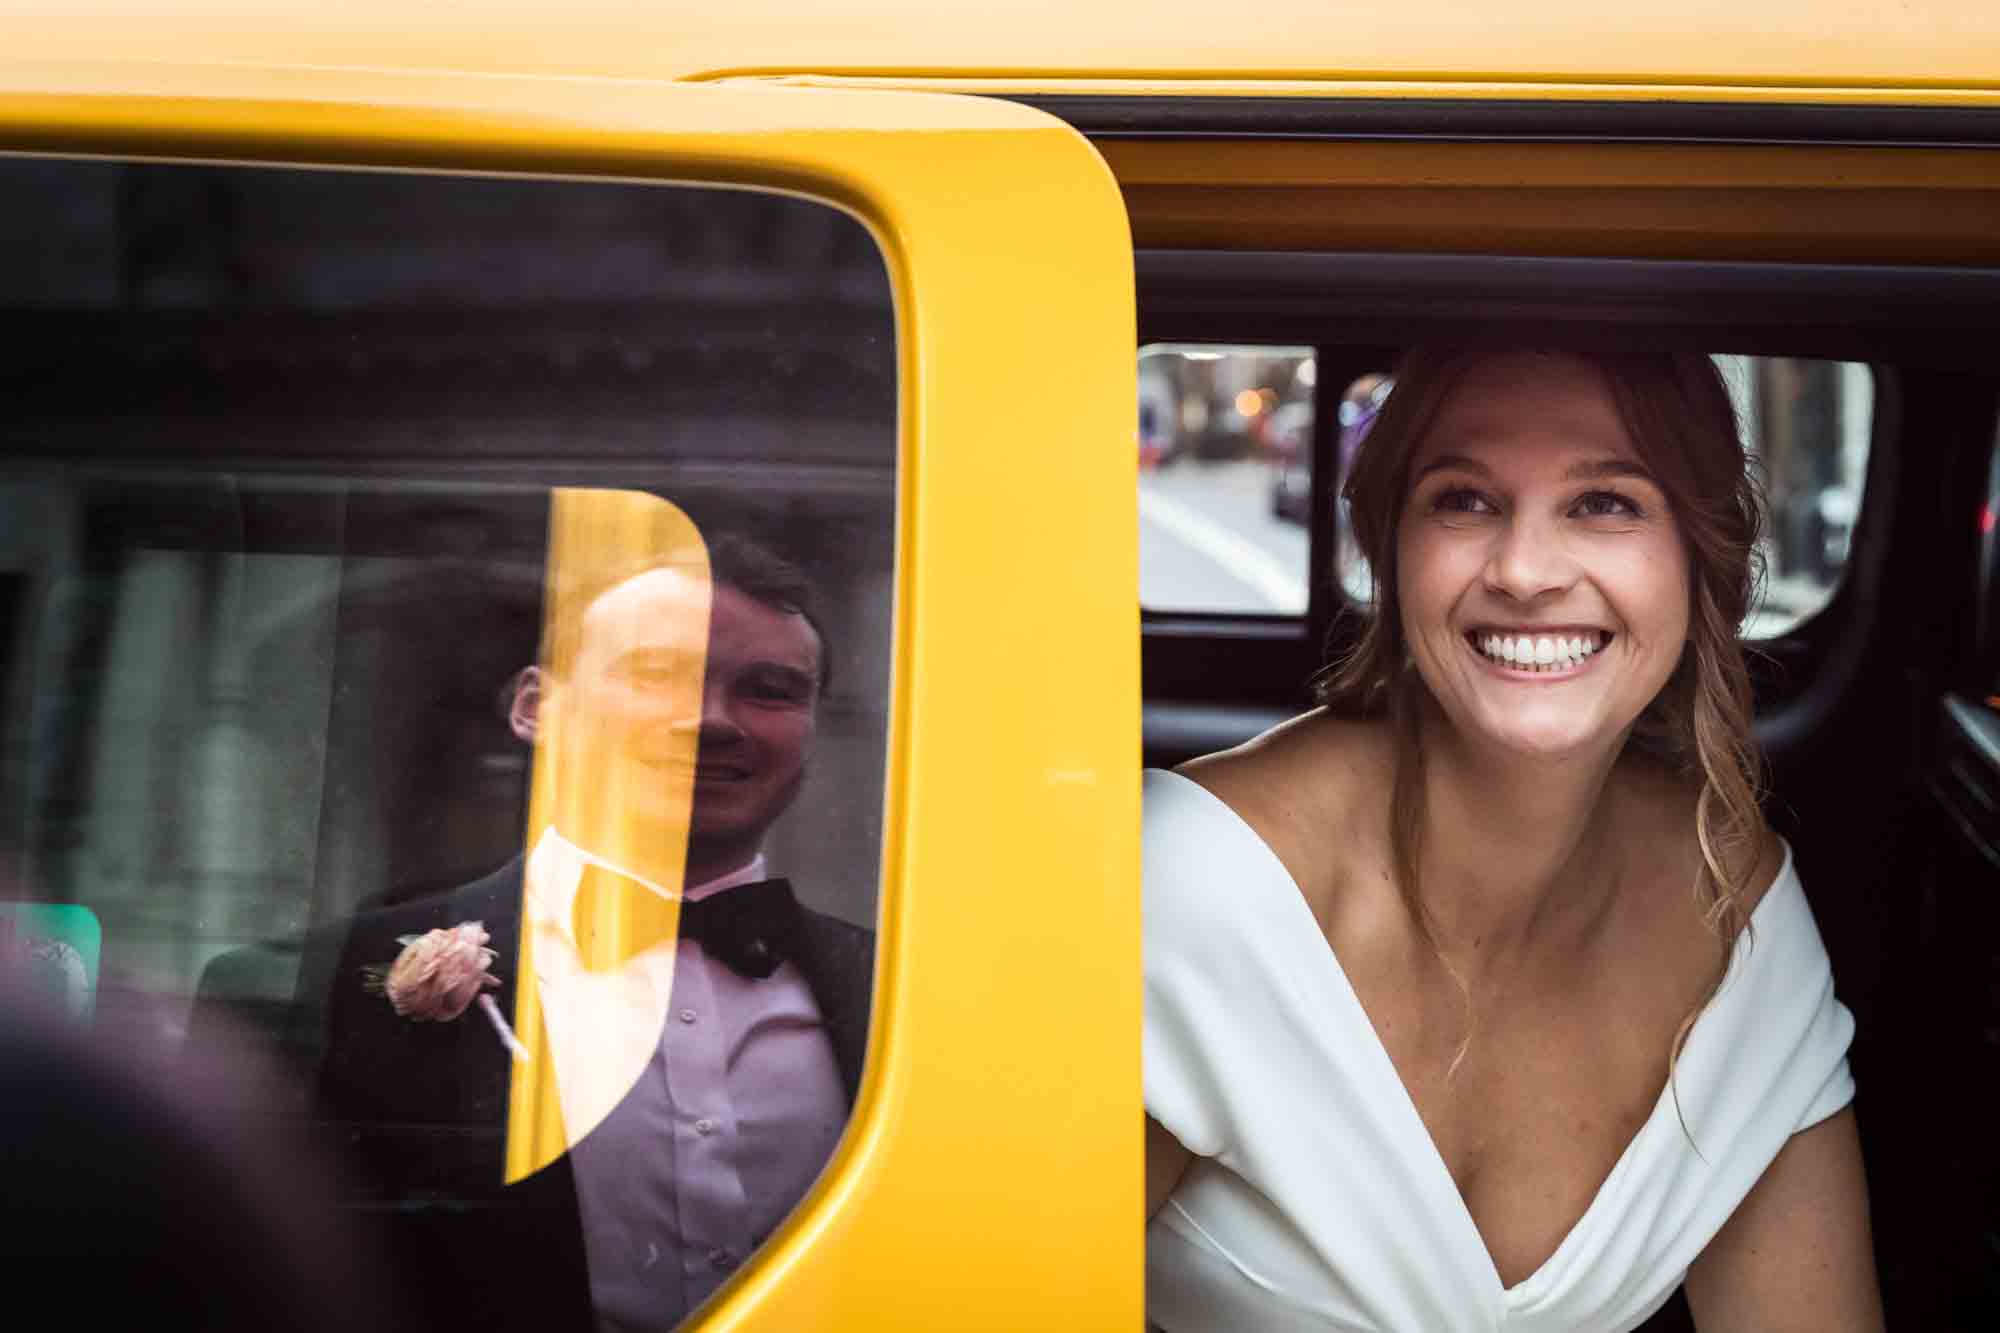 Bride looking at groom with groom's reflection in taxi cab window